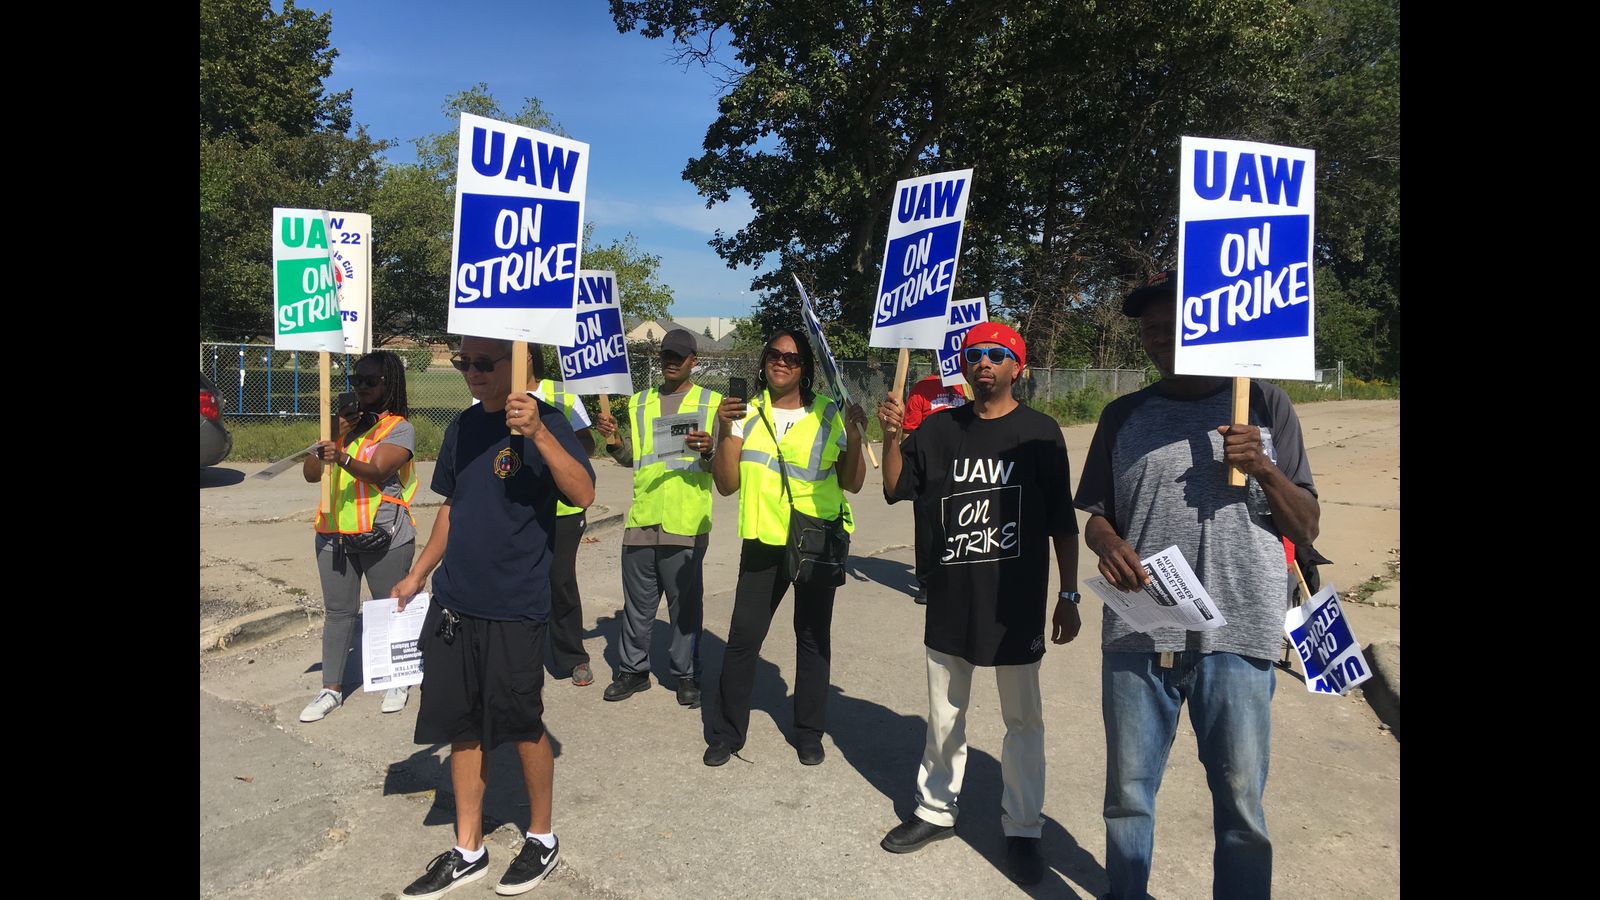 More layoffs at parts plants as GM, UAW strategize how to defeat strike